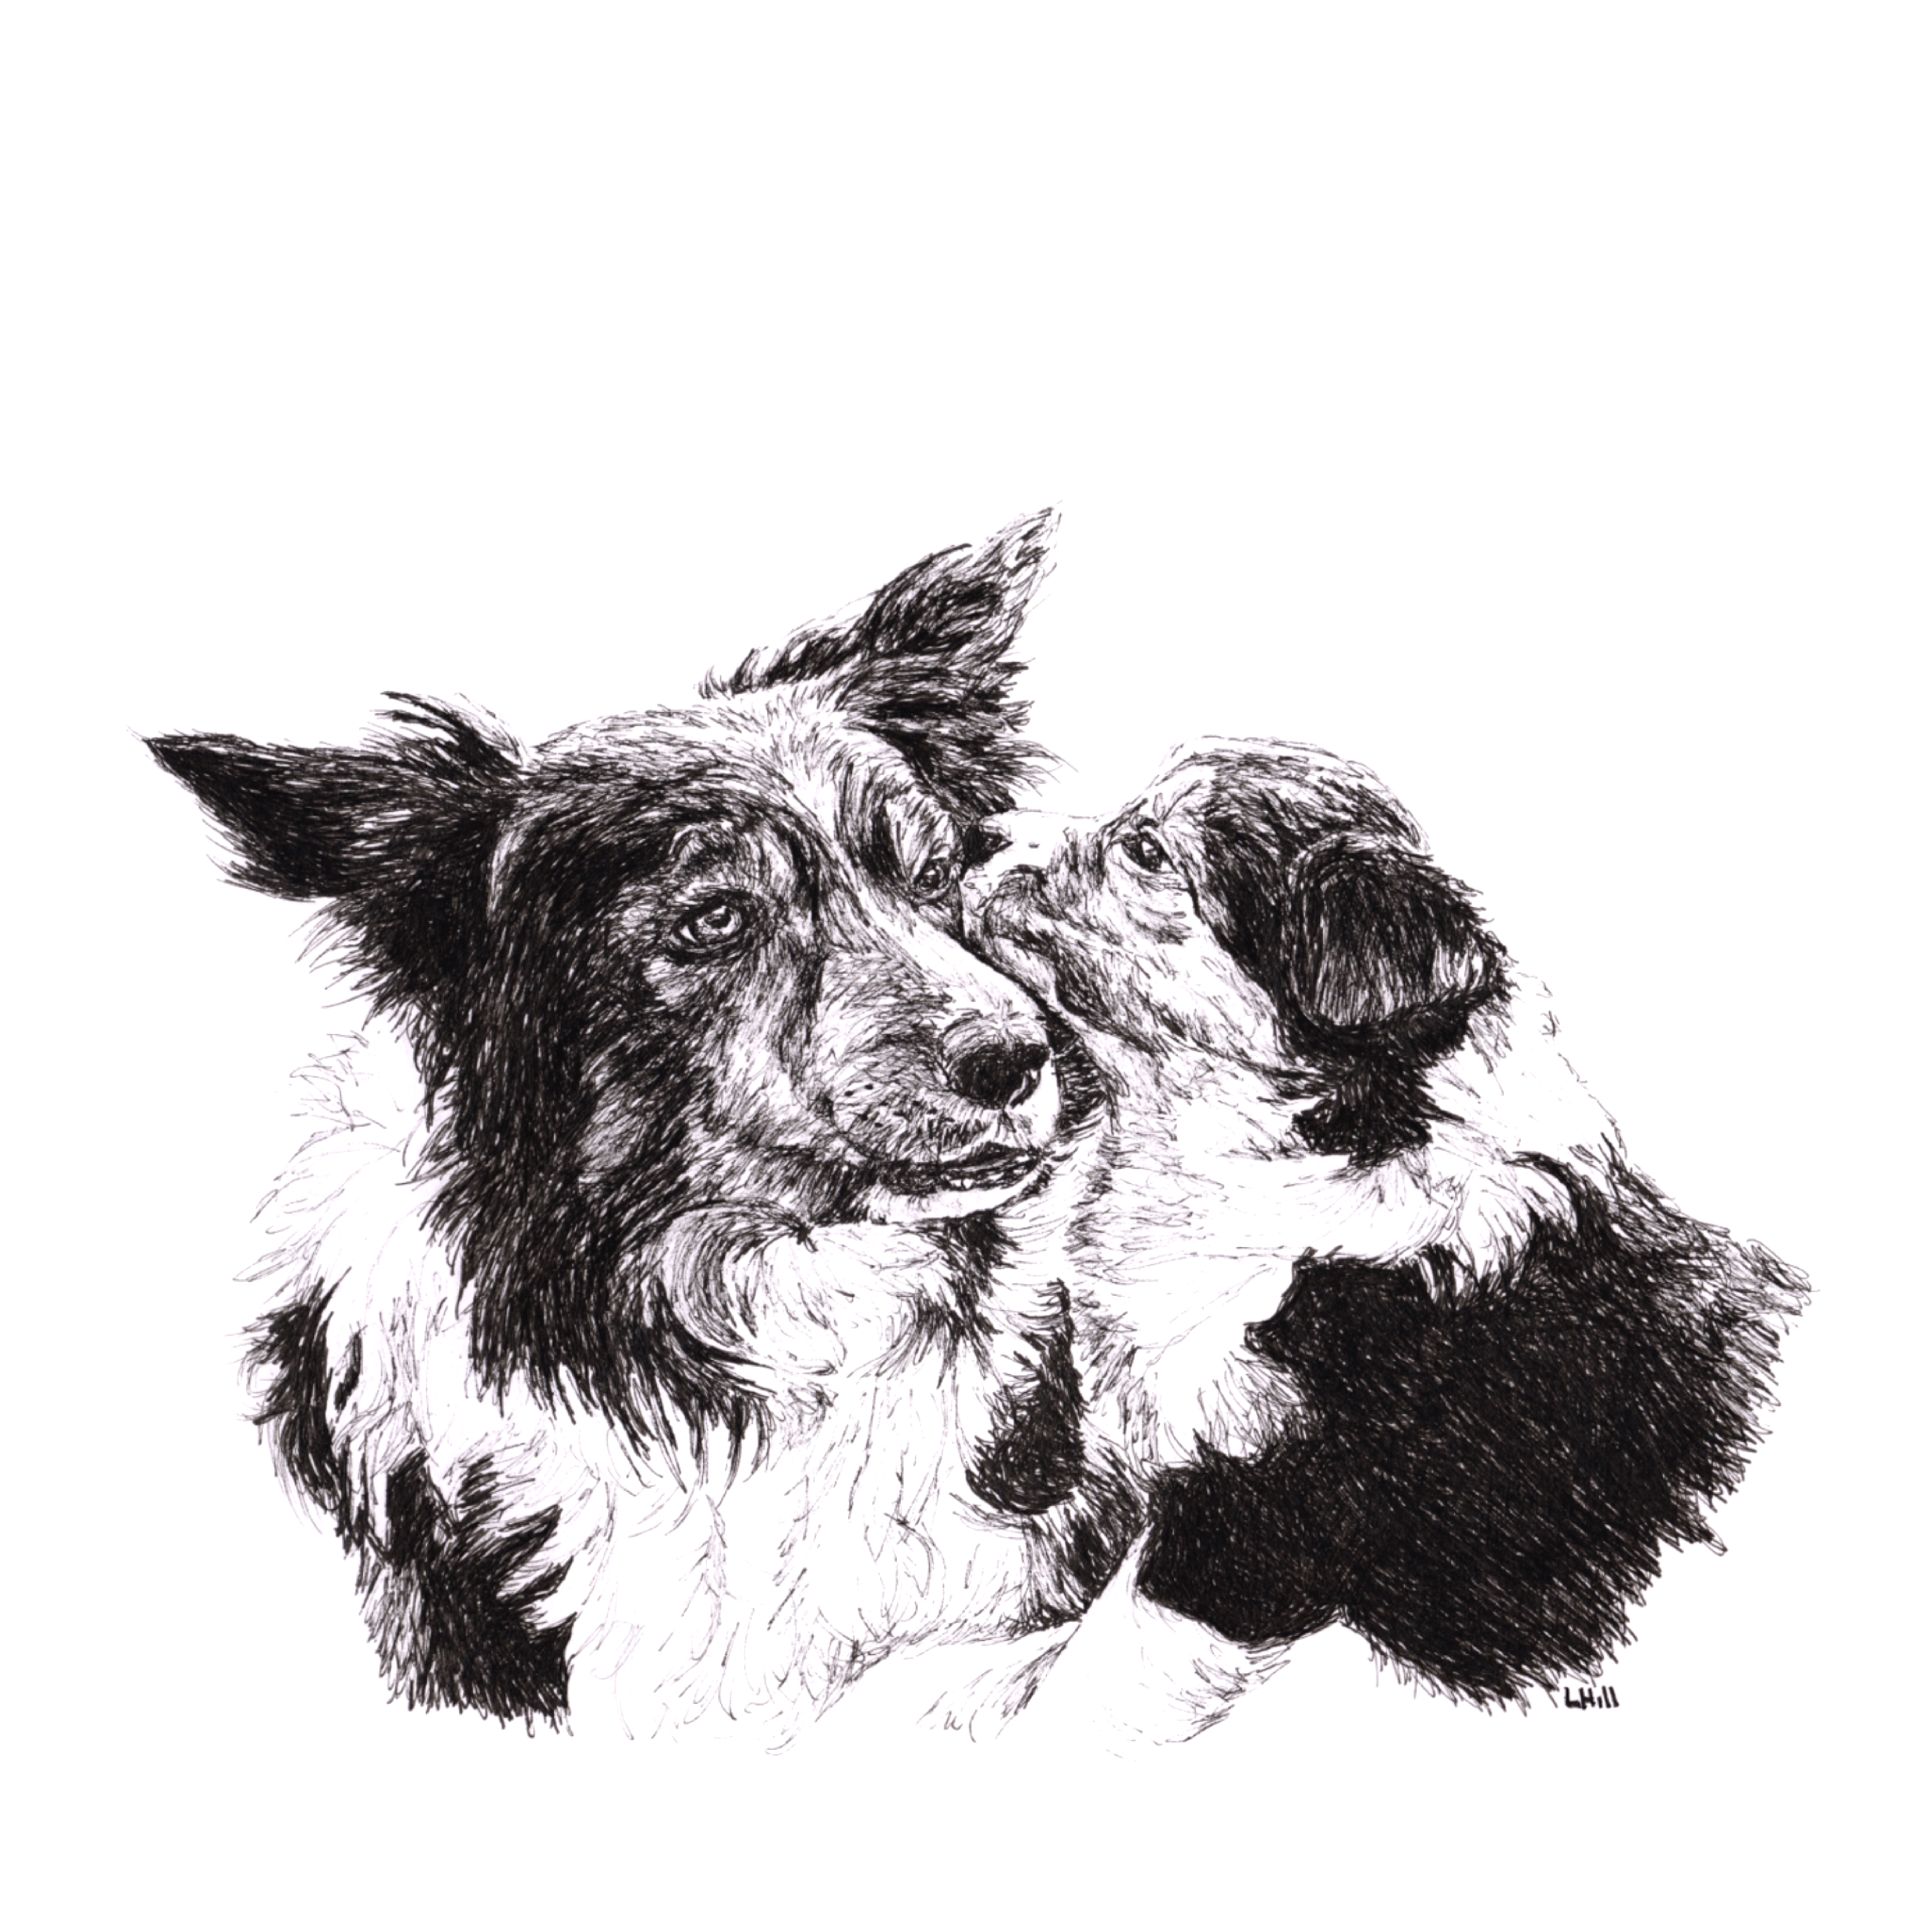 Border Collie and Puppy pen and ink illustration by Louisa Hill